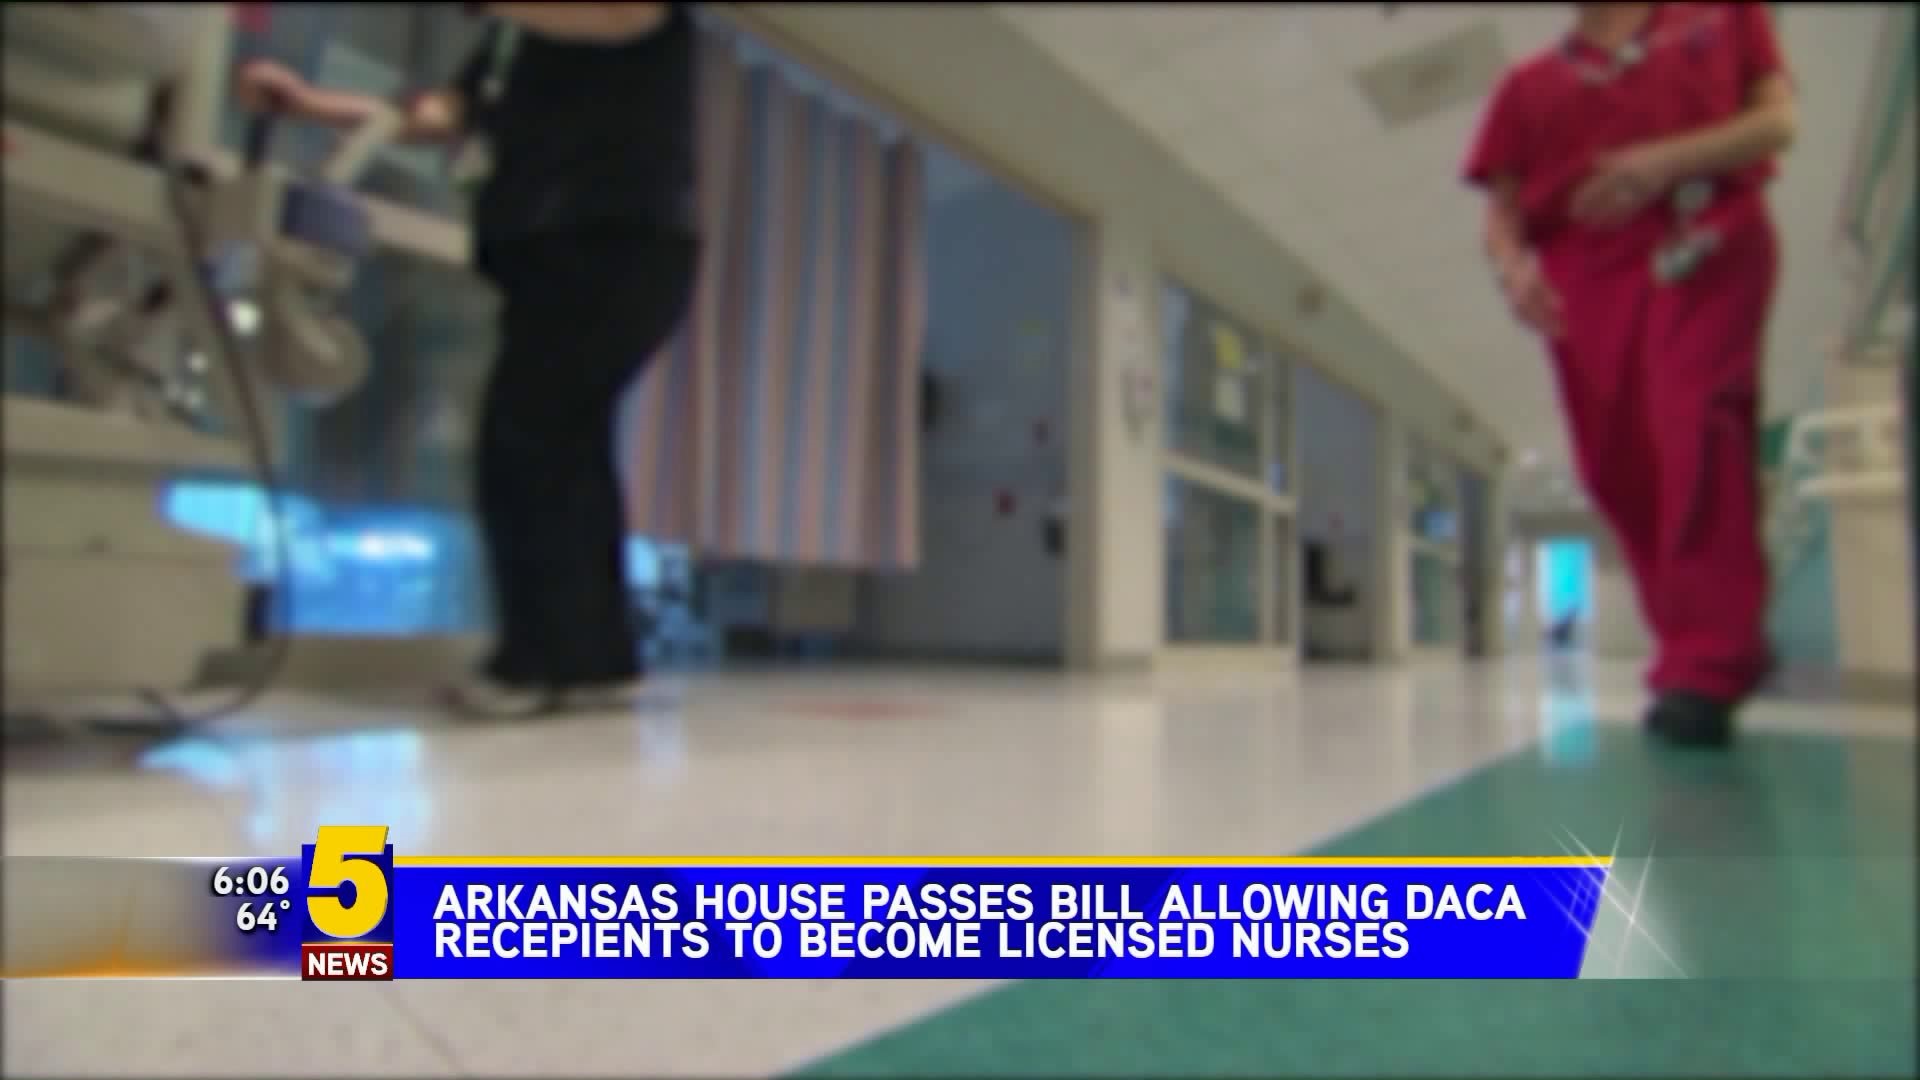 Arkansas House Passes Bill Allowing DACA Recepients To Become Licensed Nurses